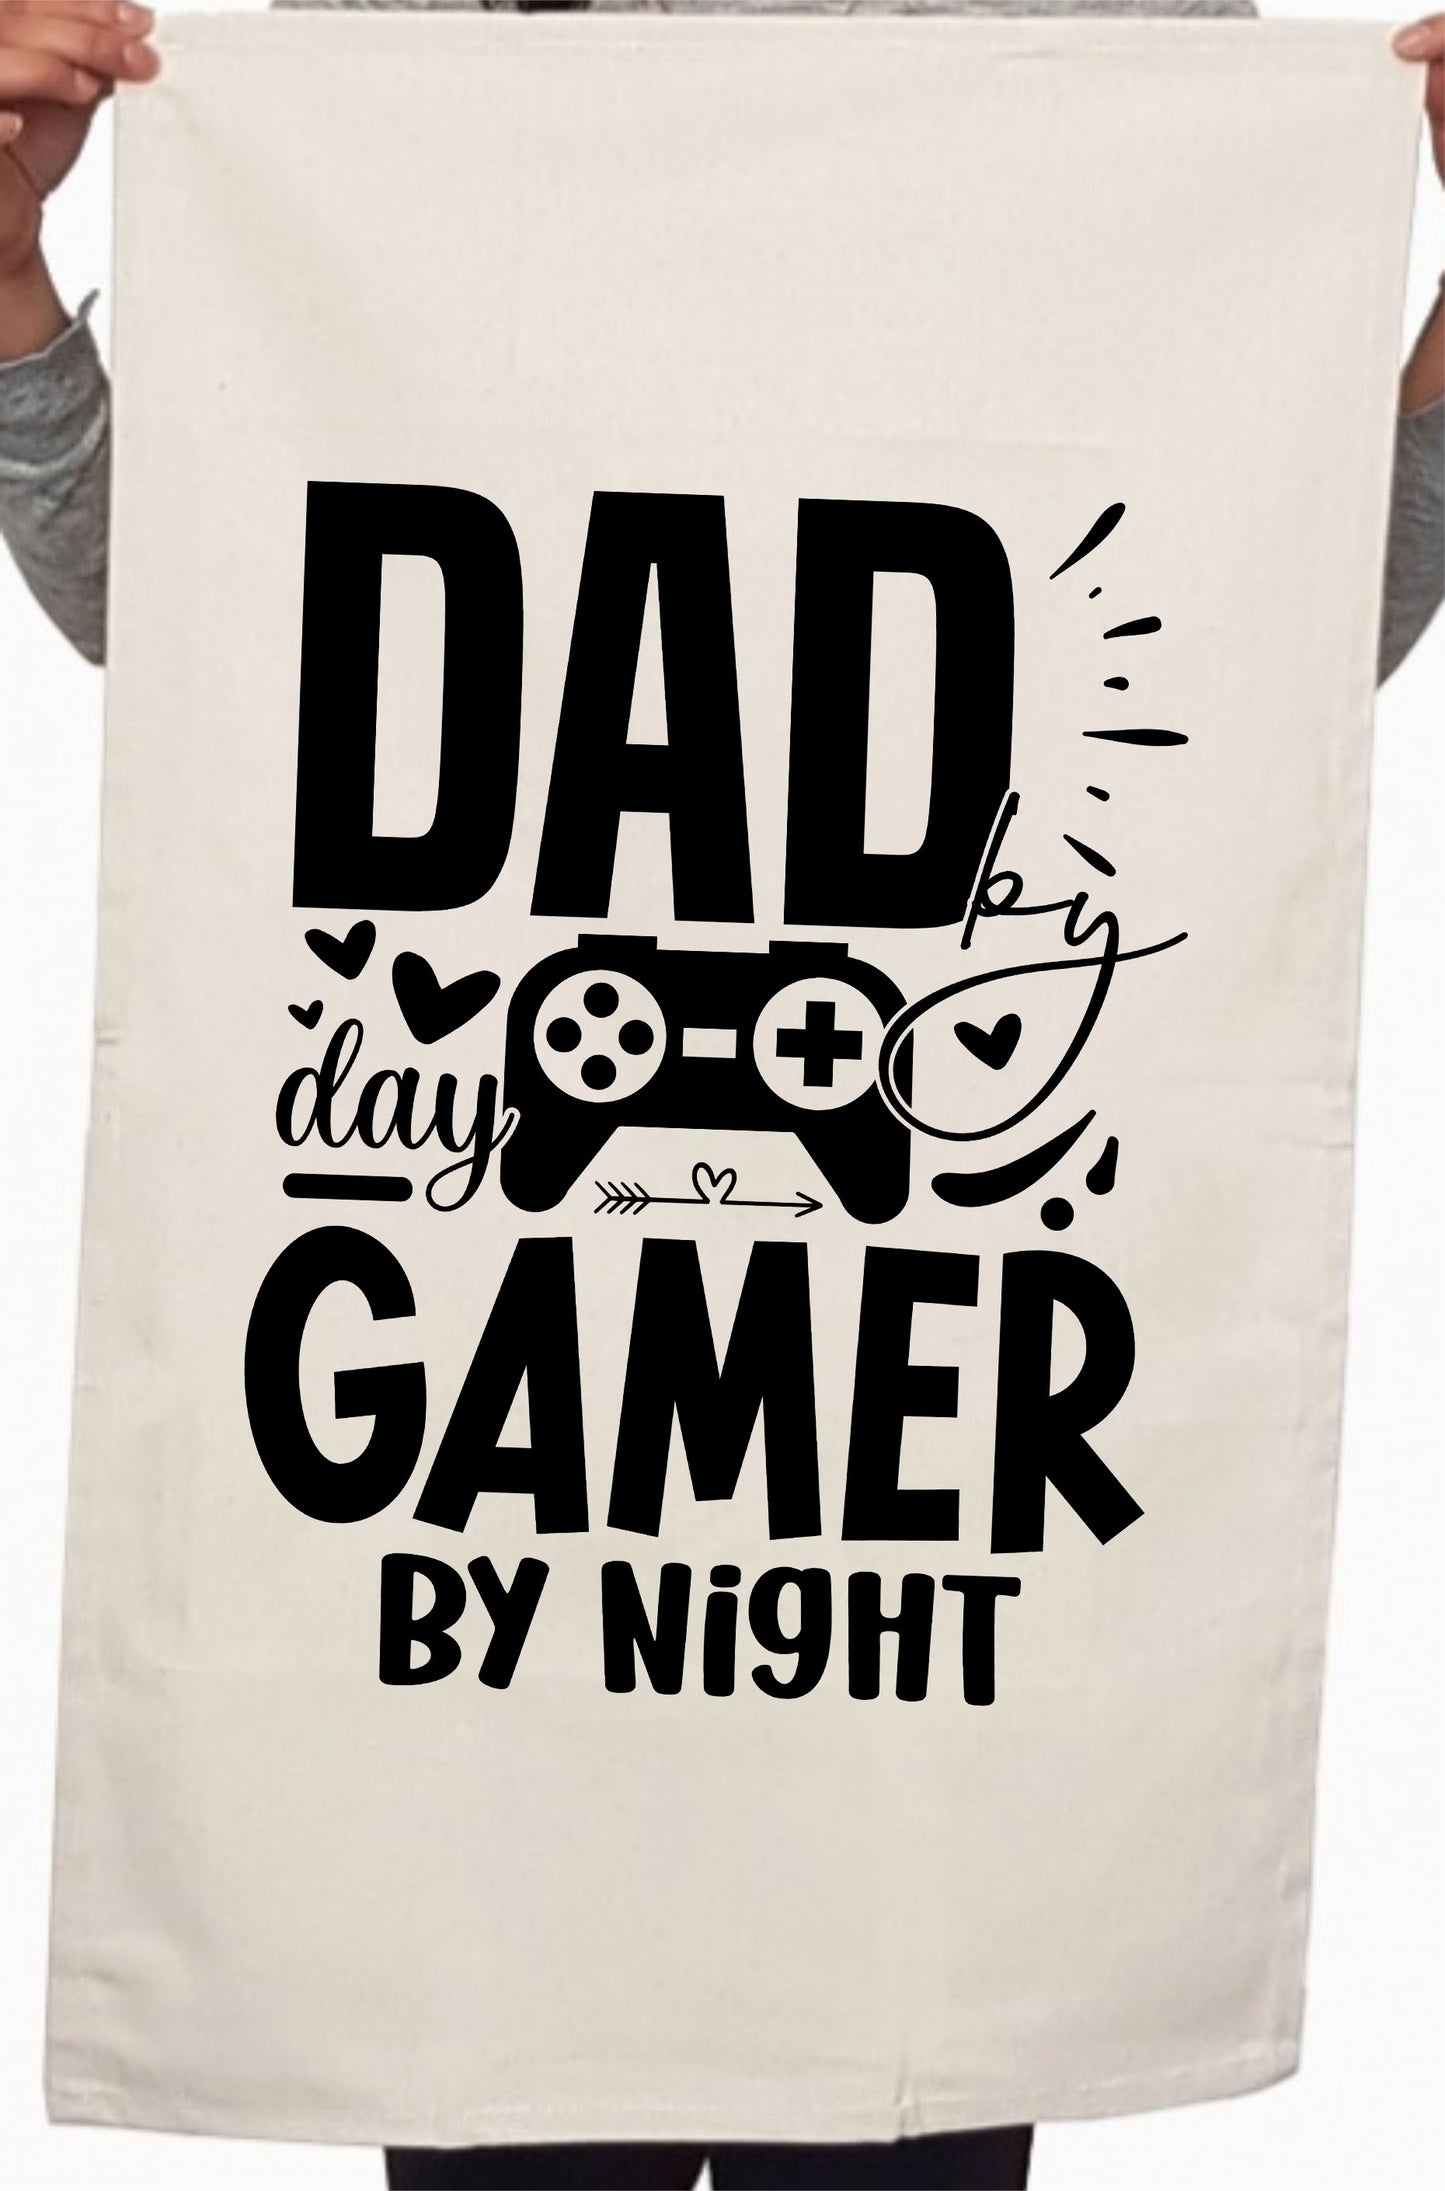 Dad by Day Gamer by Night Custom Father's Day Kitchen Table Tea Towel